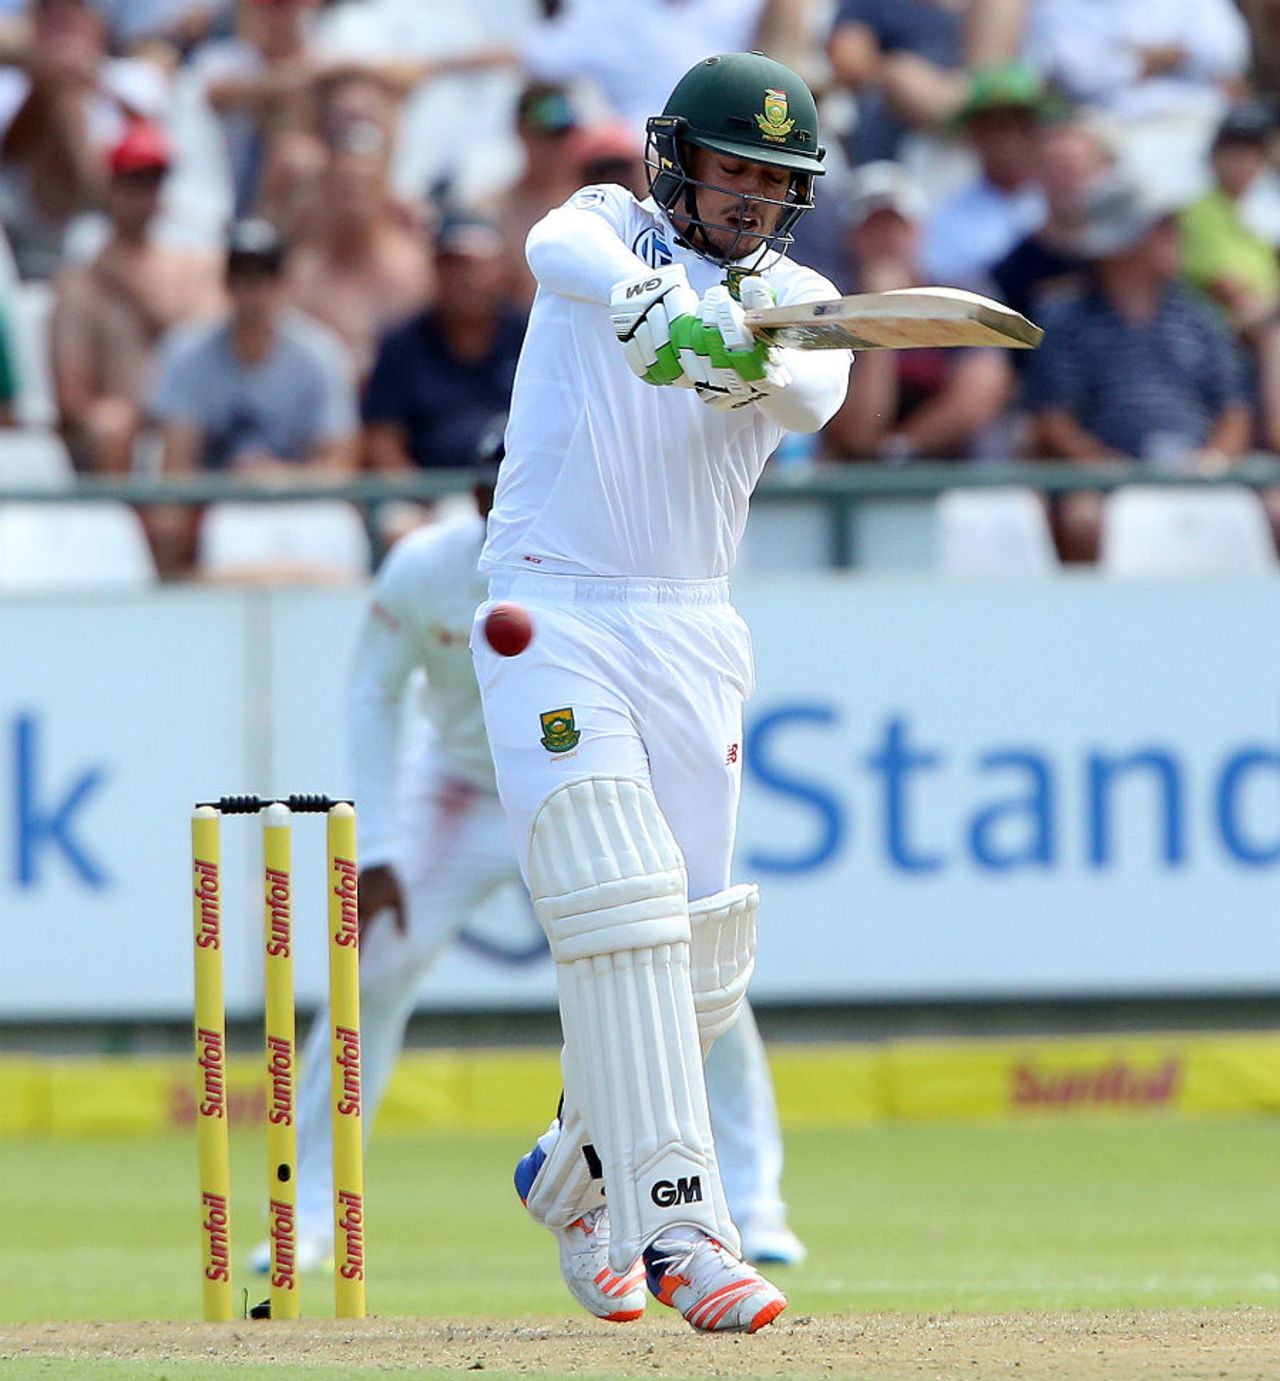 Quinton de Kock rode some early luck to compile a brisk half-century, South Africa v Sri Lanka, 2nd Test, Cape Town, January 2, 2017